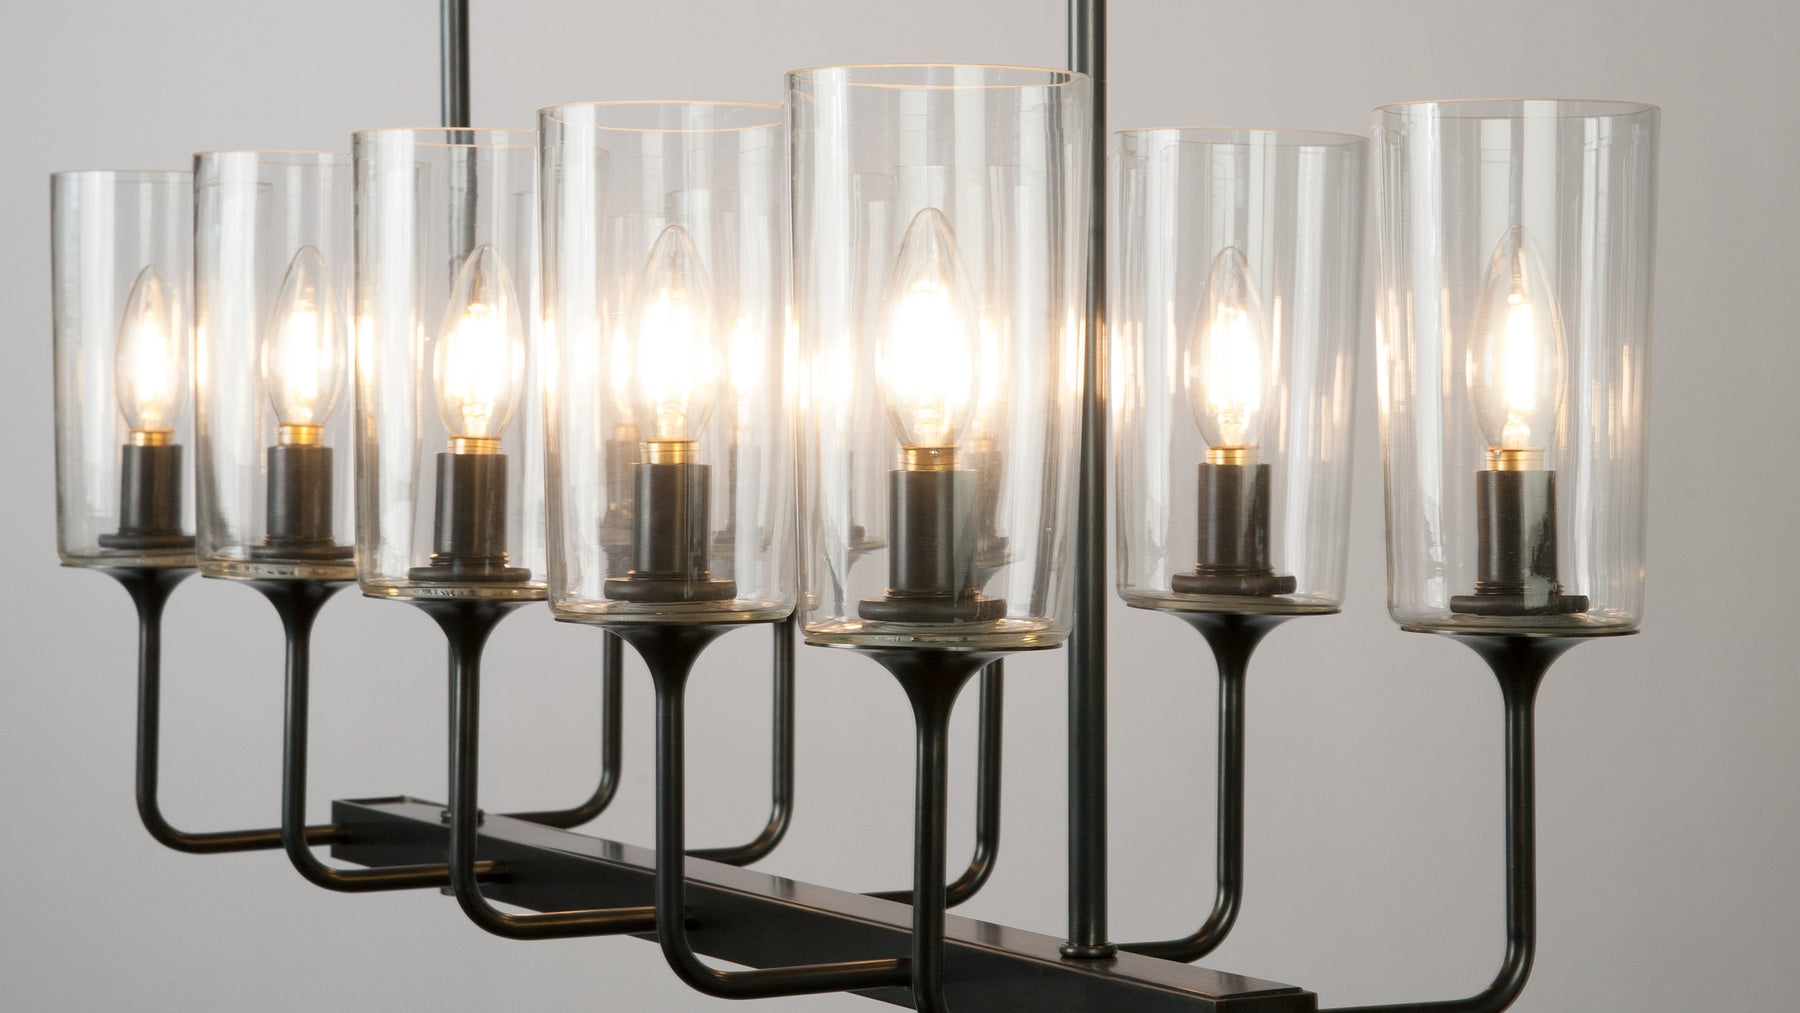 A close up of the Veronique 10 Linear Chandelier, and its ten evenly spaced arms that flare at the ends to hold clear glass shades, in a dark waxed bronze finish.